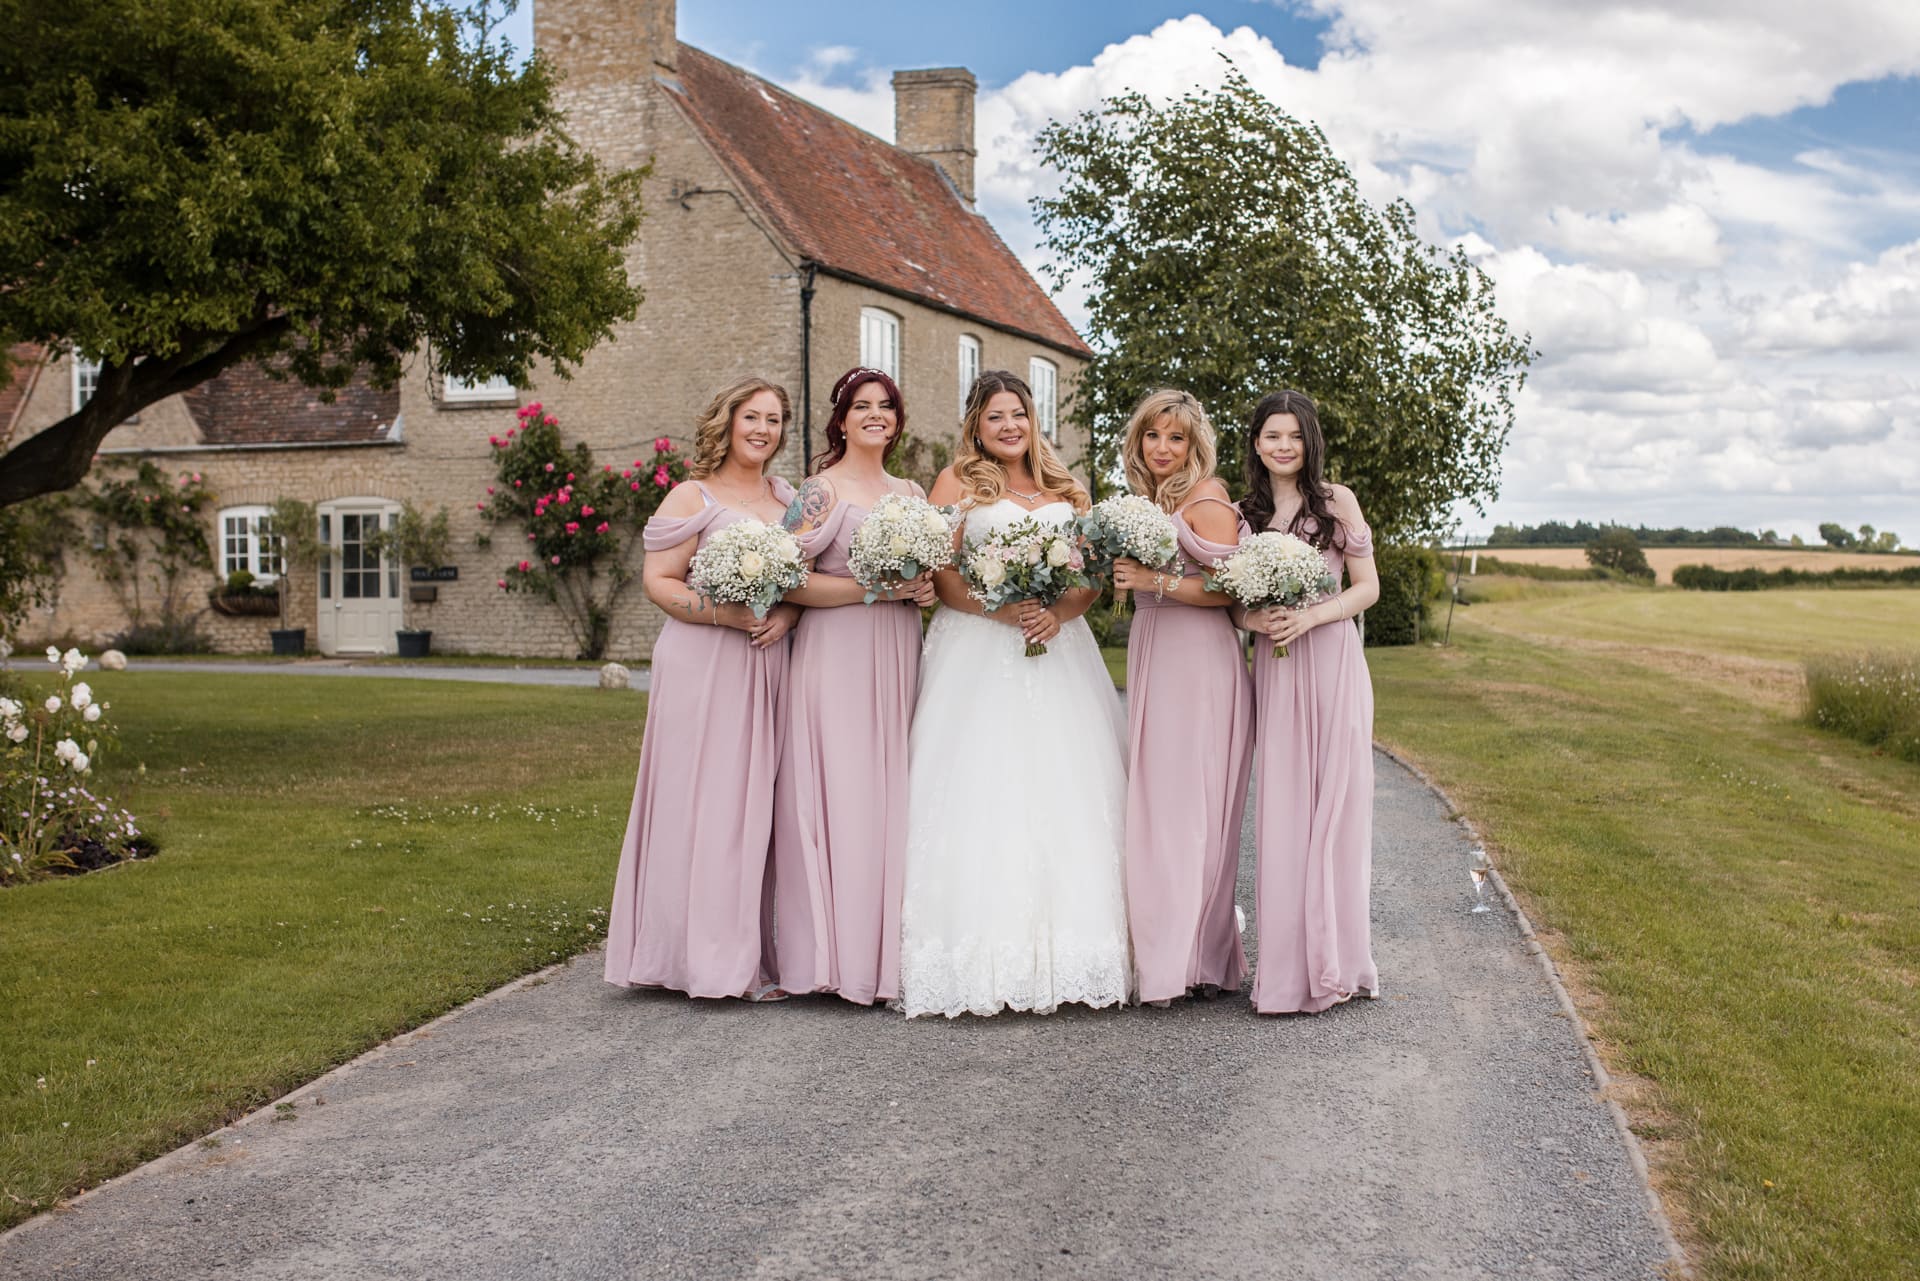 Bride and Bridesmaids with Farmhouse in the background at the Stratton Court Barn Wedding Venue